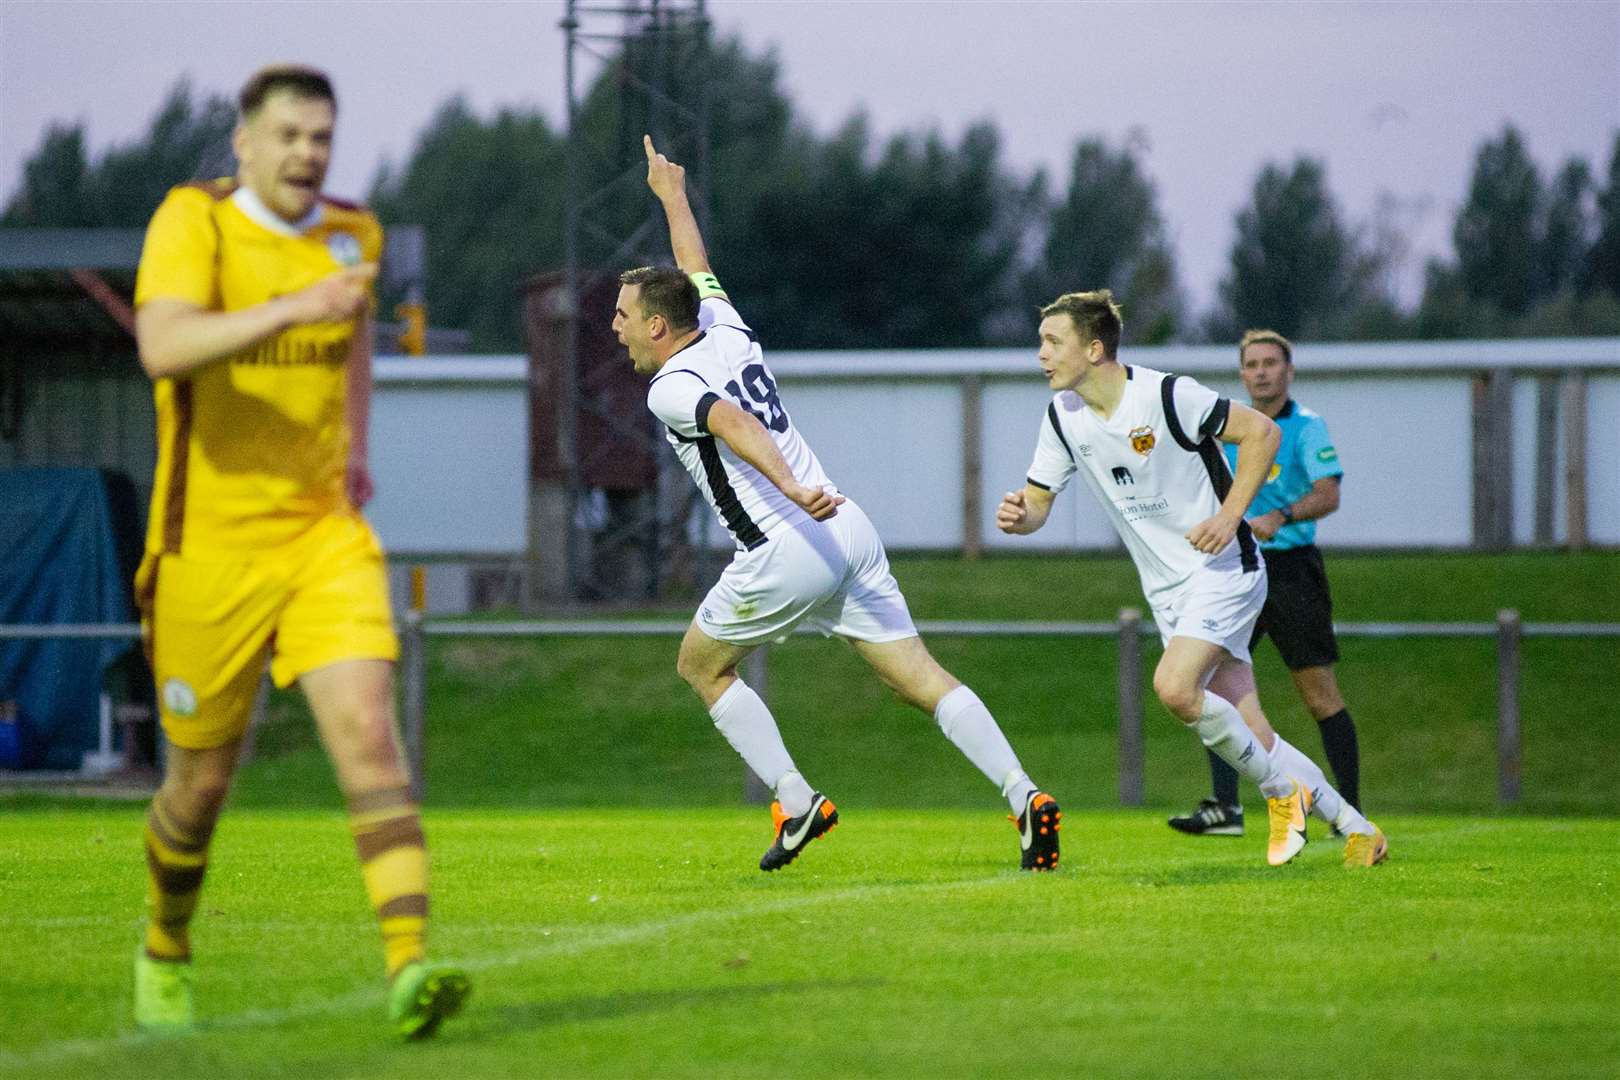 Speysiders' captain Bruce Milne volleys home the final goal for the visitors. ..Forres Mechanics (0) vs Rothes FC (3) - North of Scotland Cup - Mosset Park, Forres 04/08/2021...Picture: Daniel Forsyth..